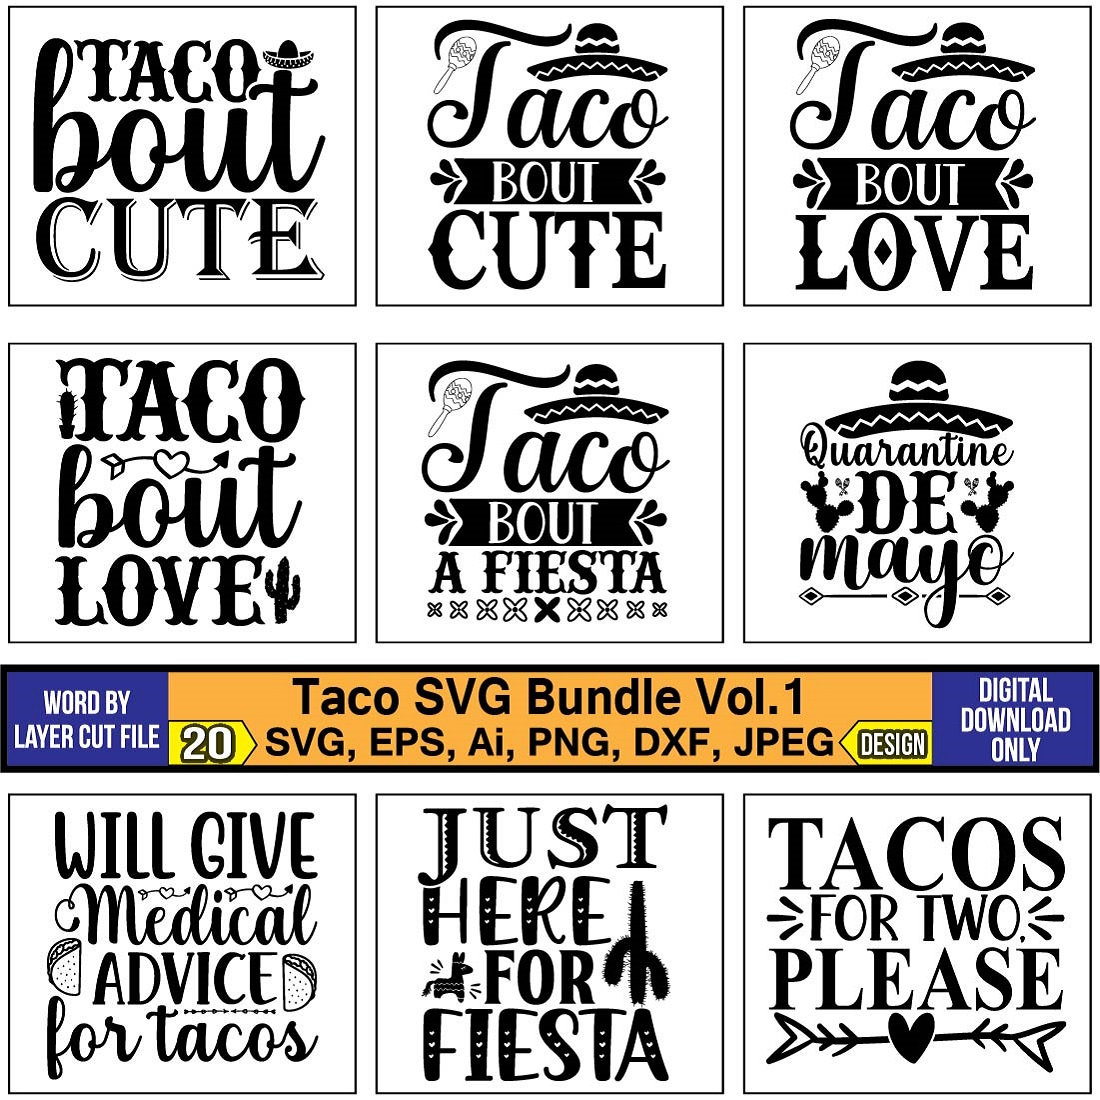 A selection of beautiful images for prints on the theme of tacos.